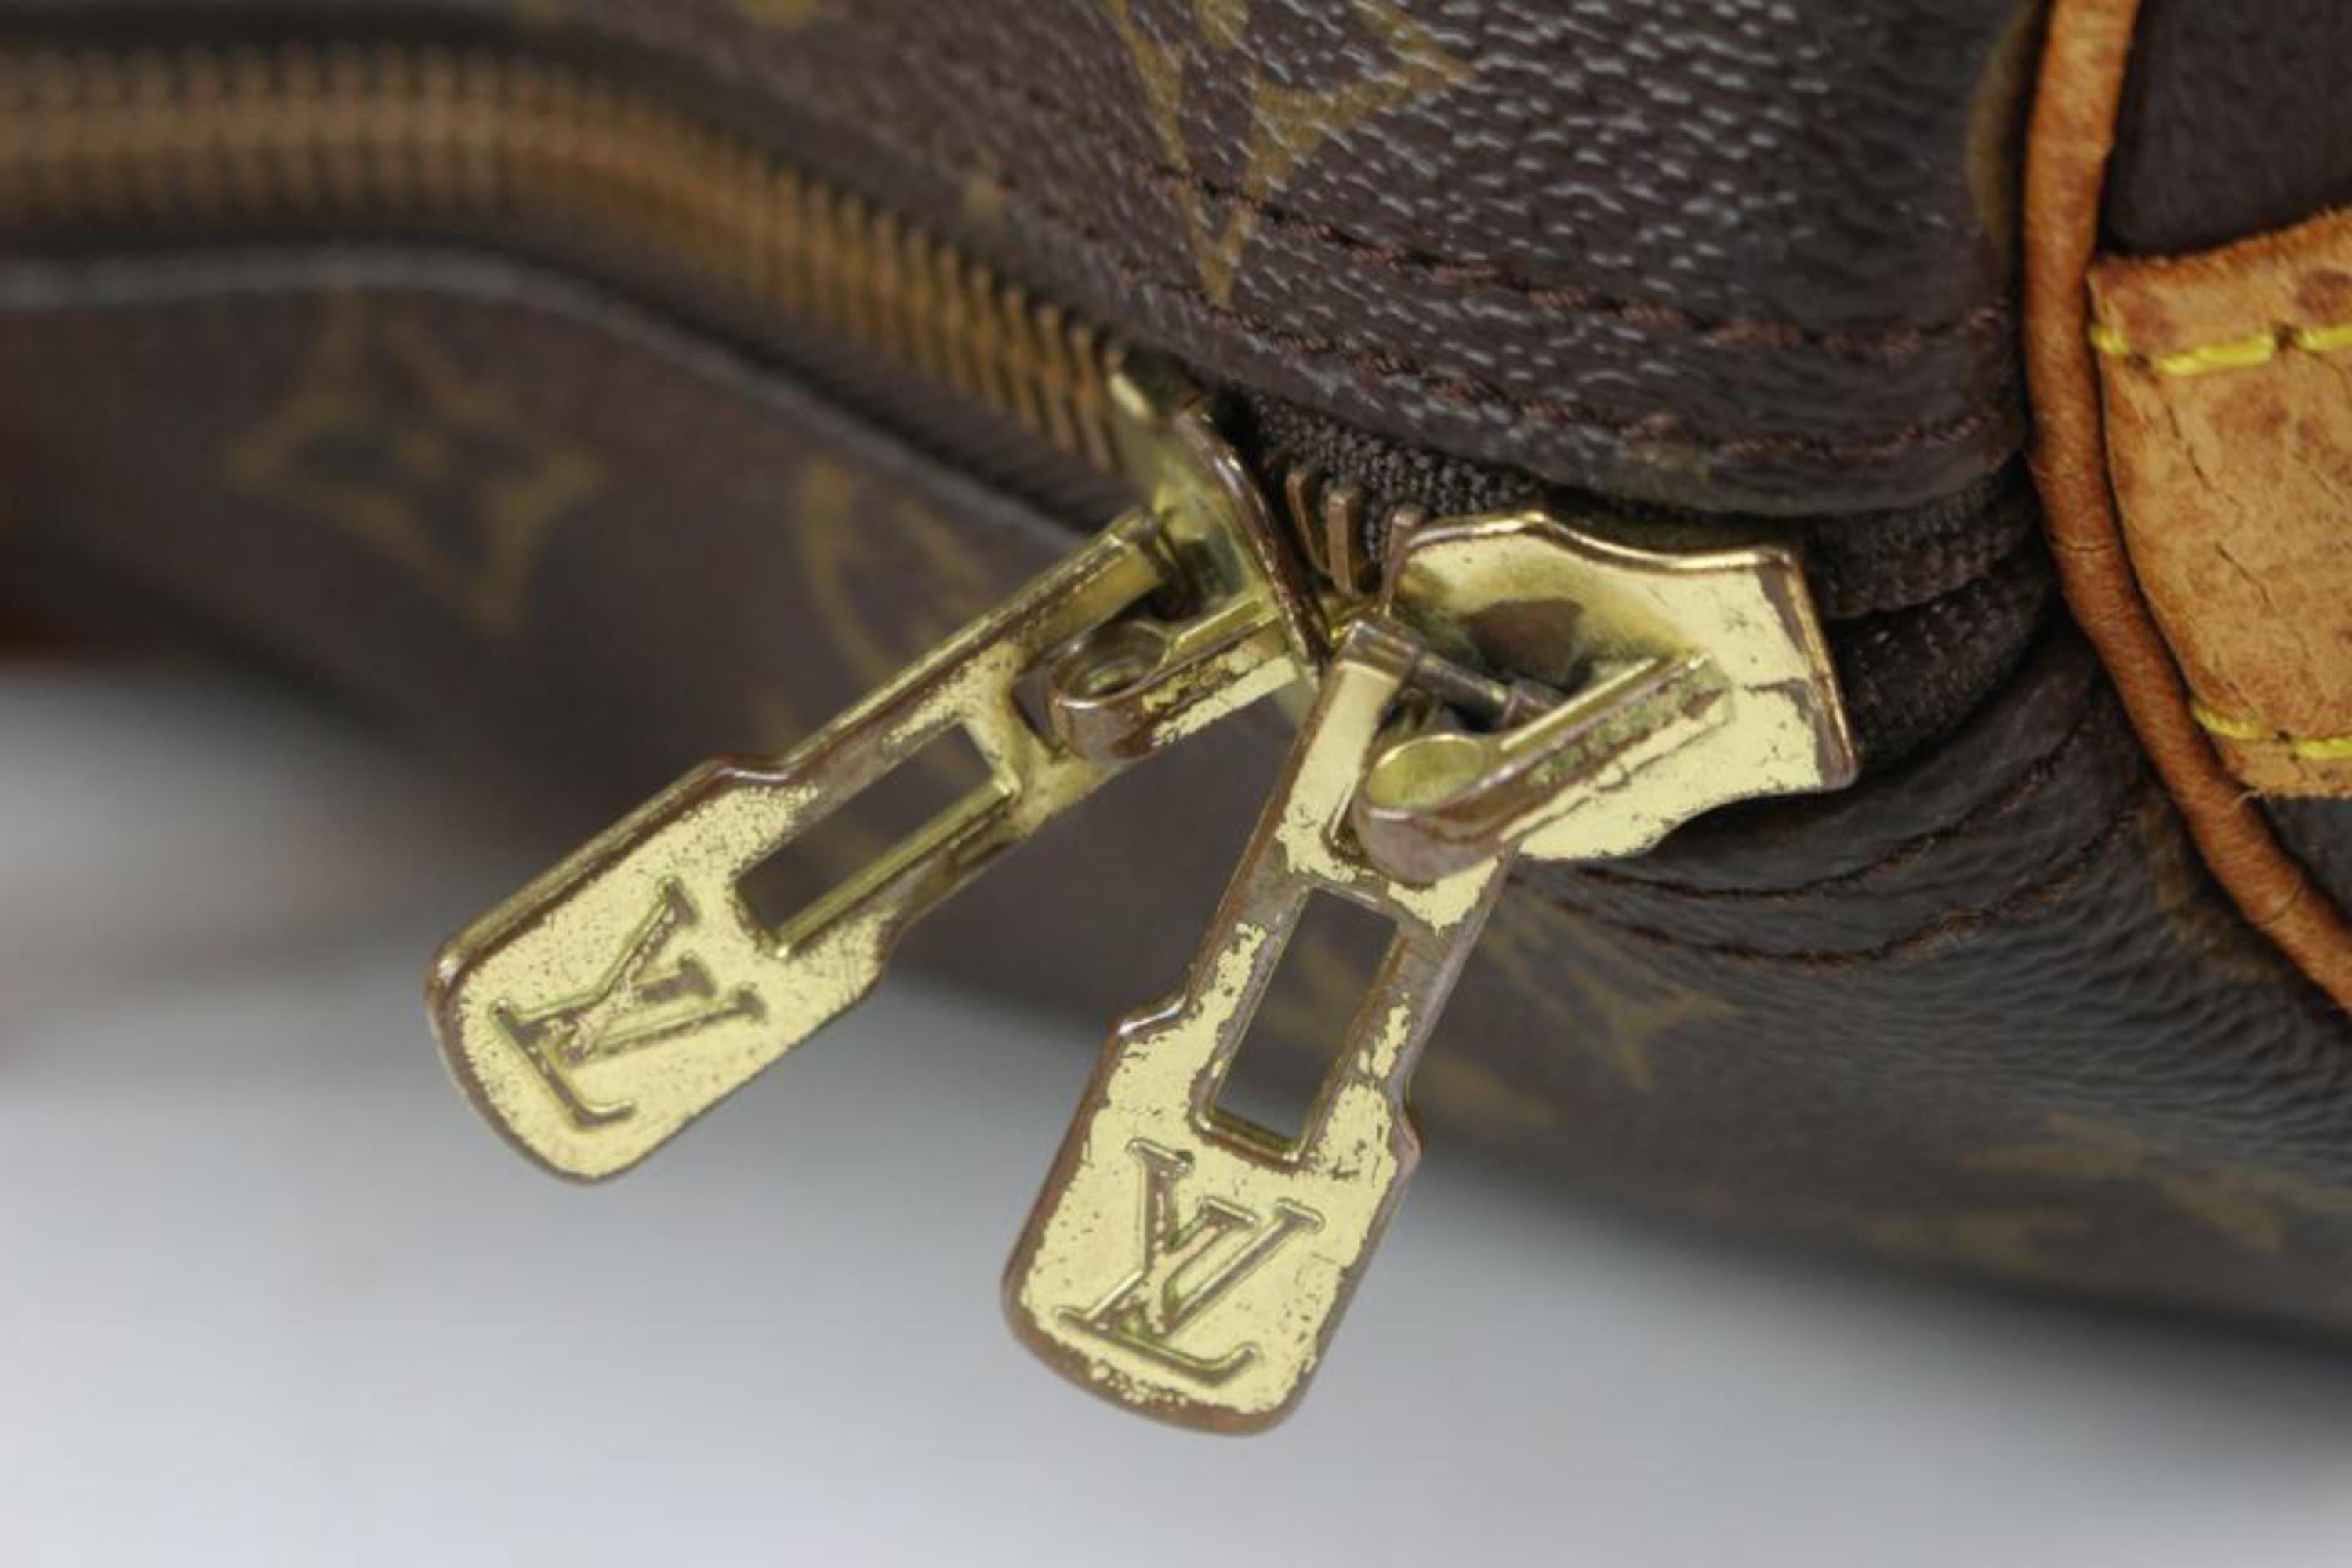 Louis Vuitton Monogram Keepall Bandouliere 45 Duffle Bag with Strap 1122lv11 For Sale 2